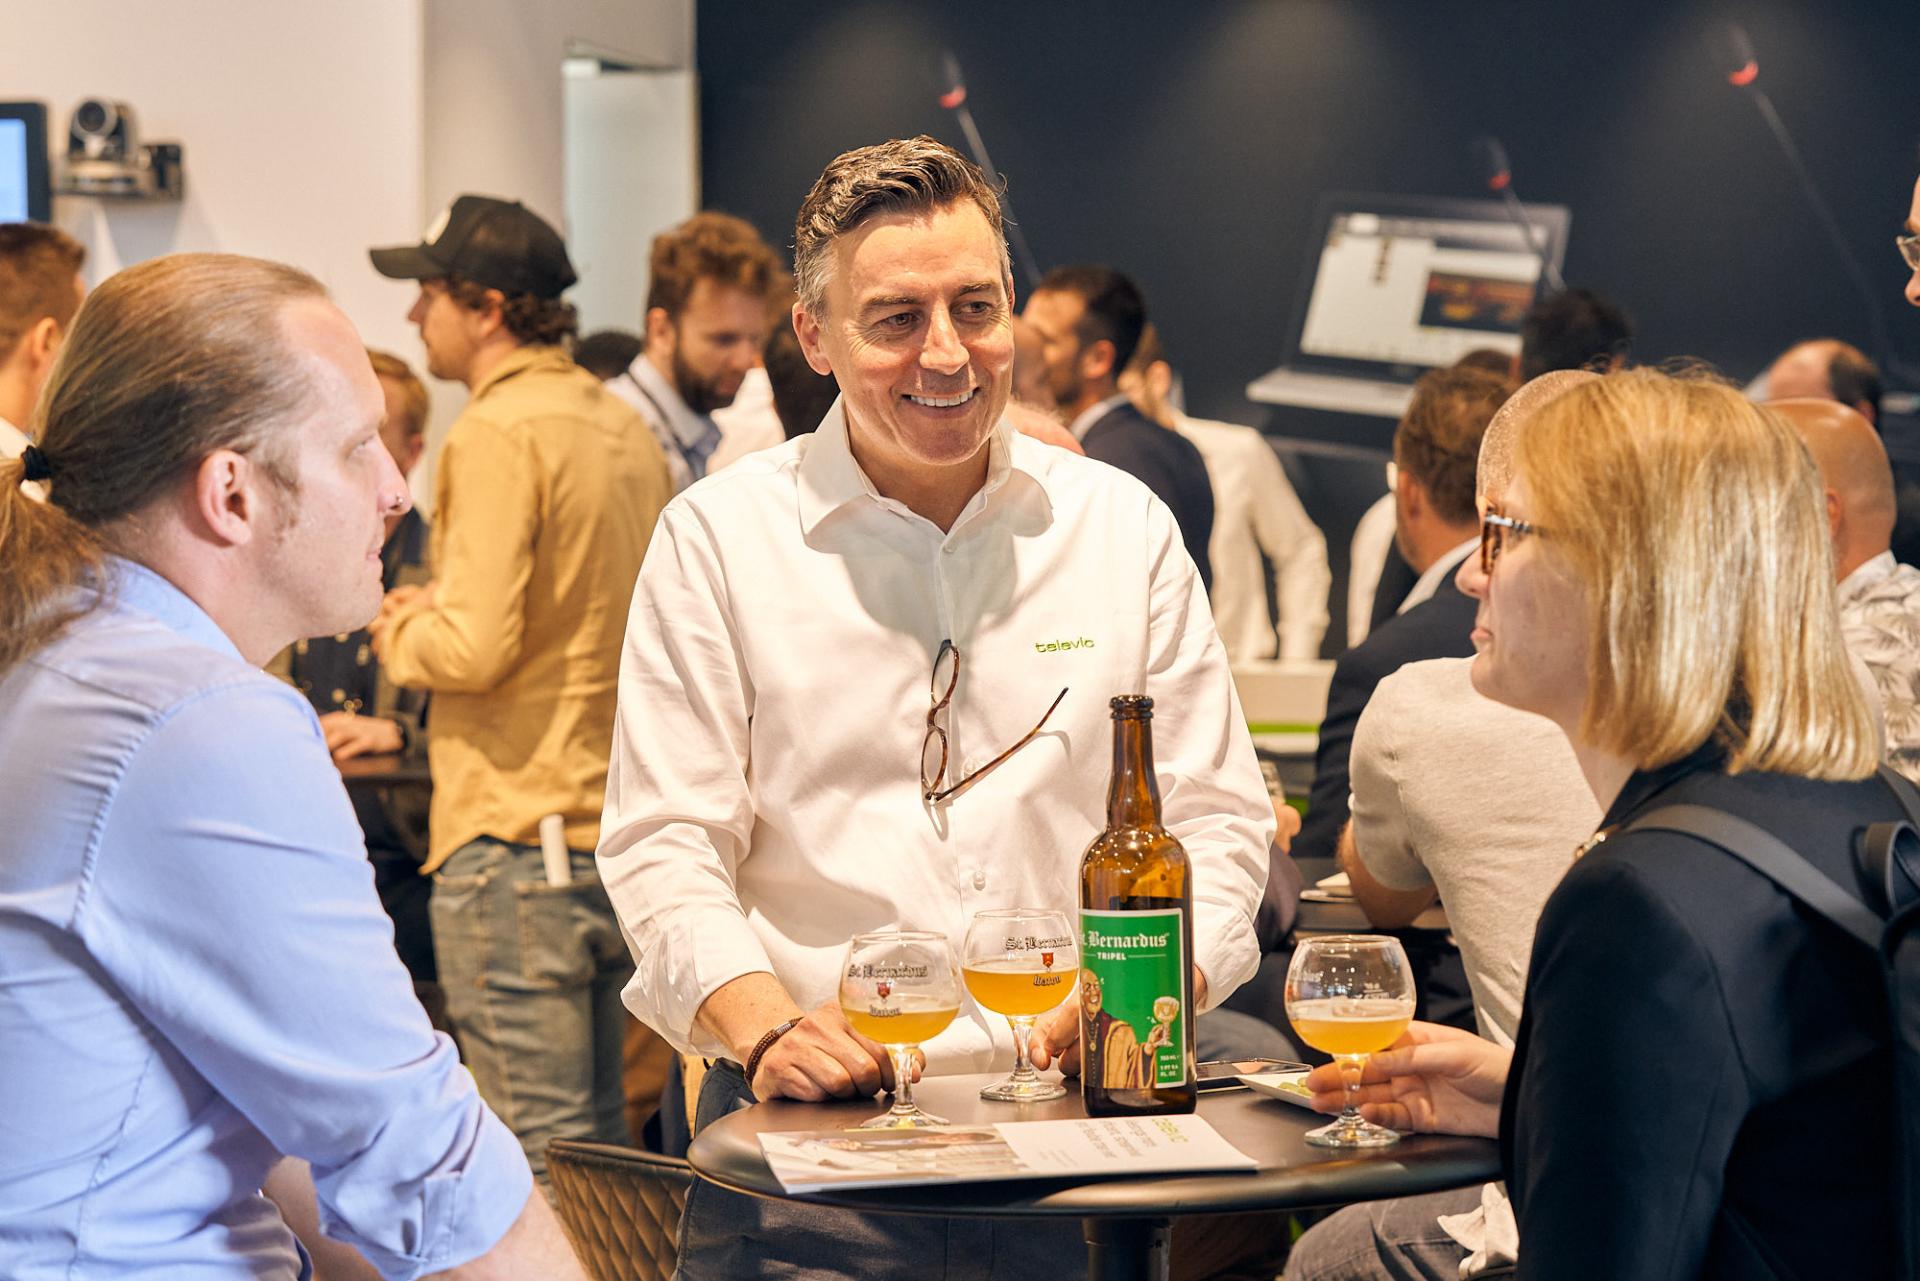 The Belgian Beer Event at ISE 